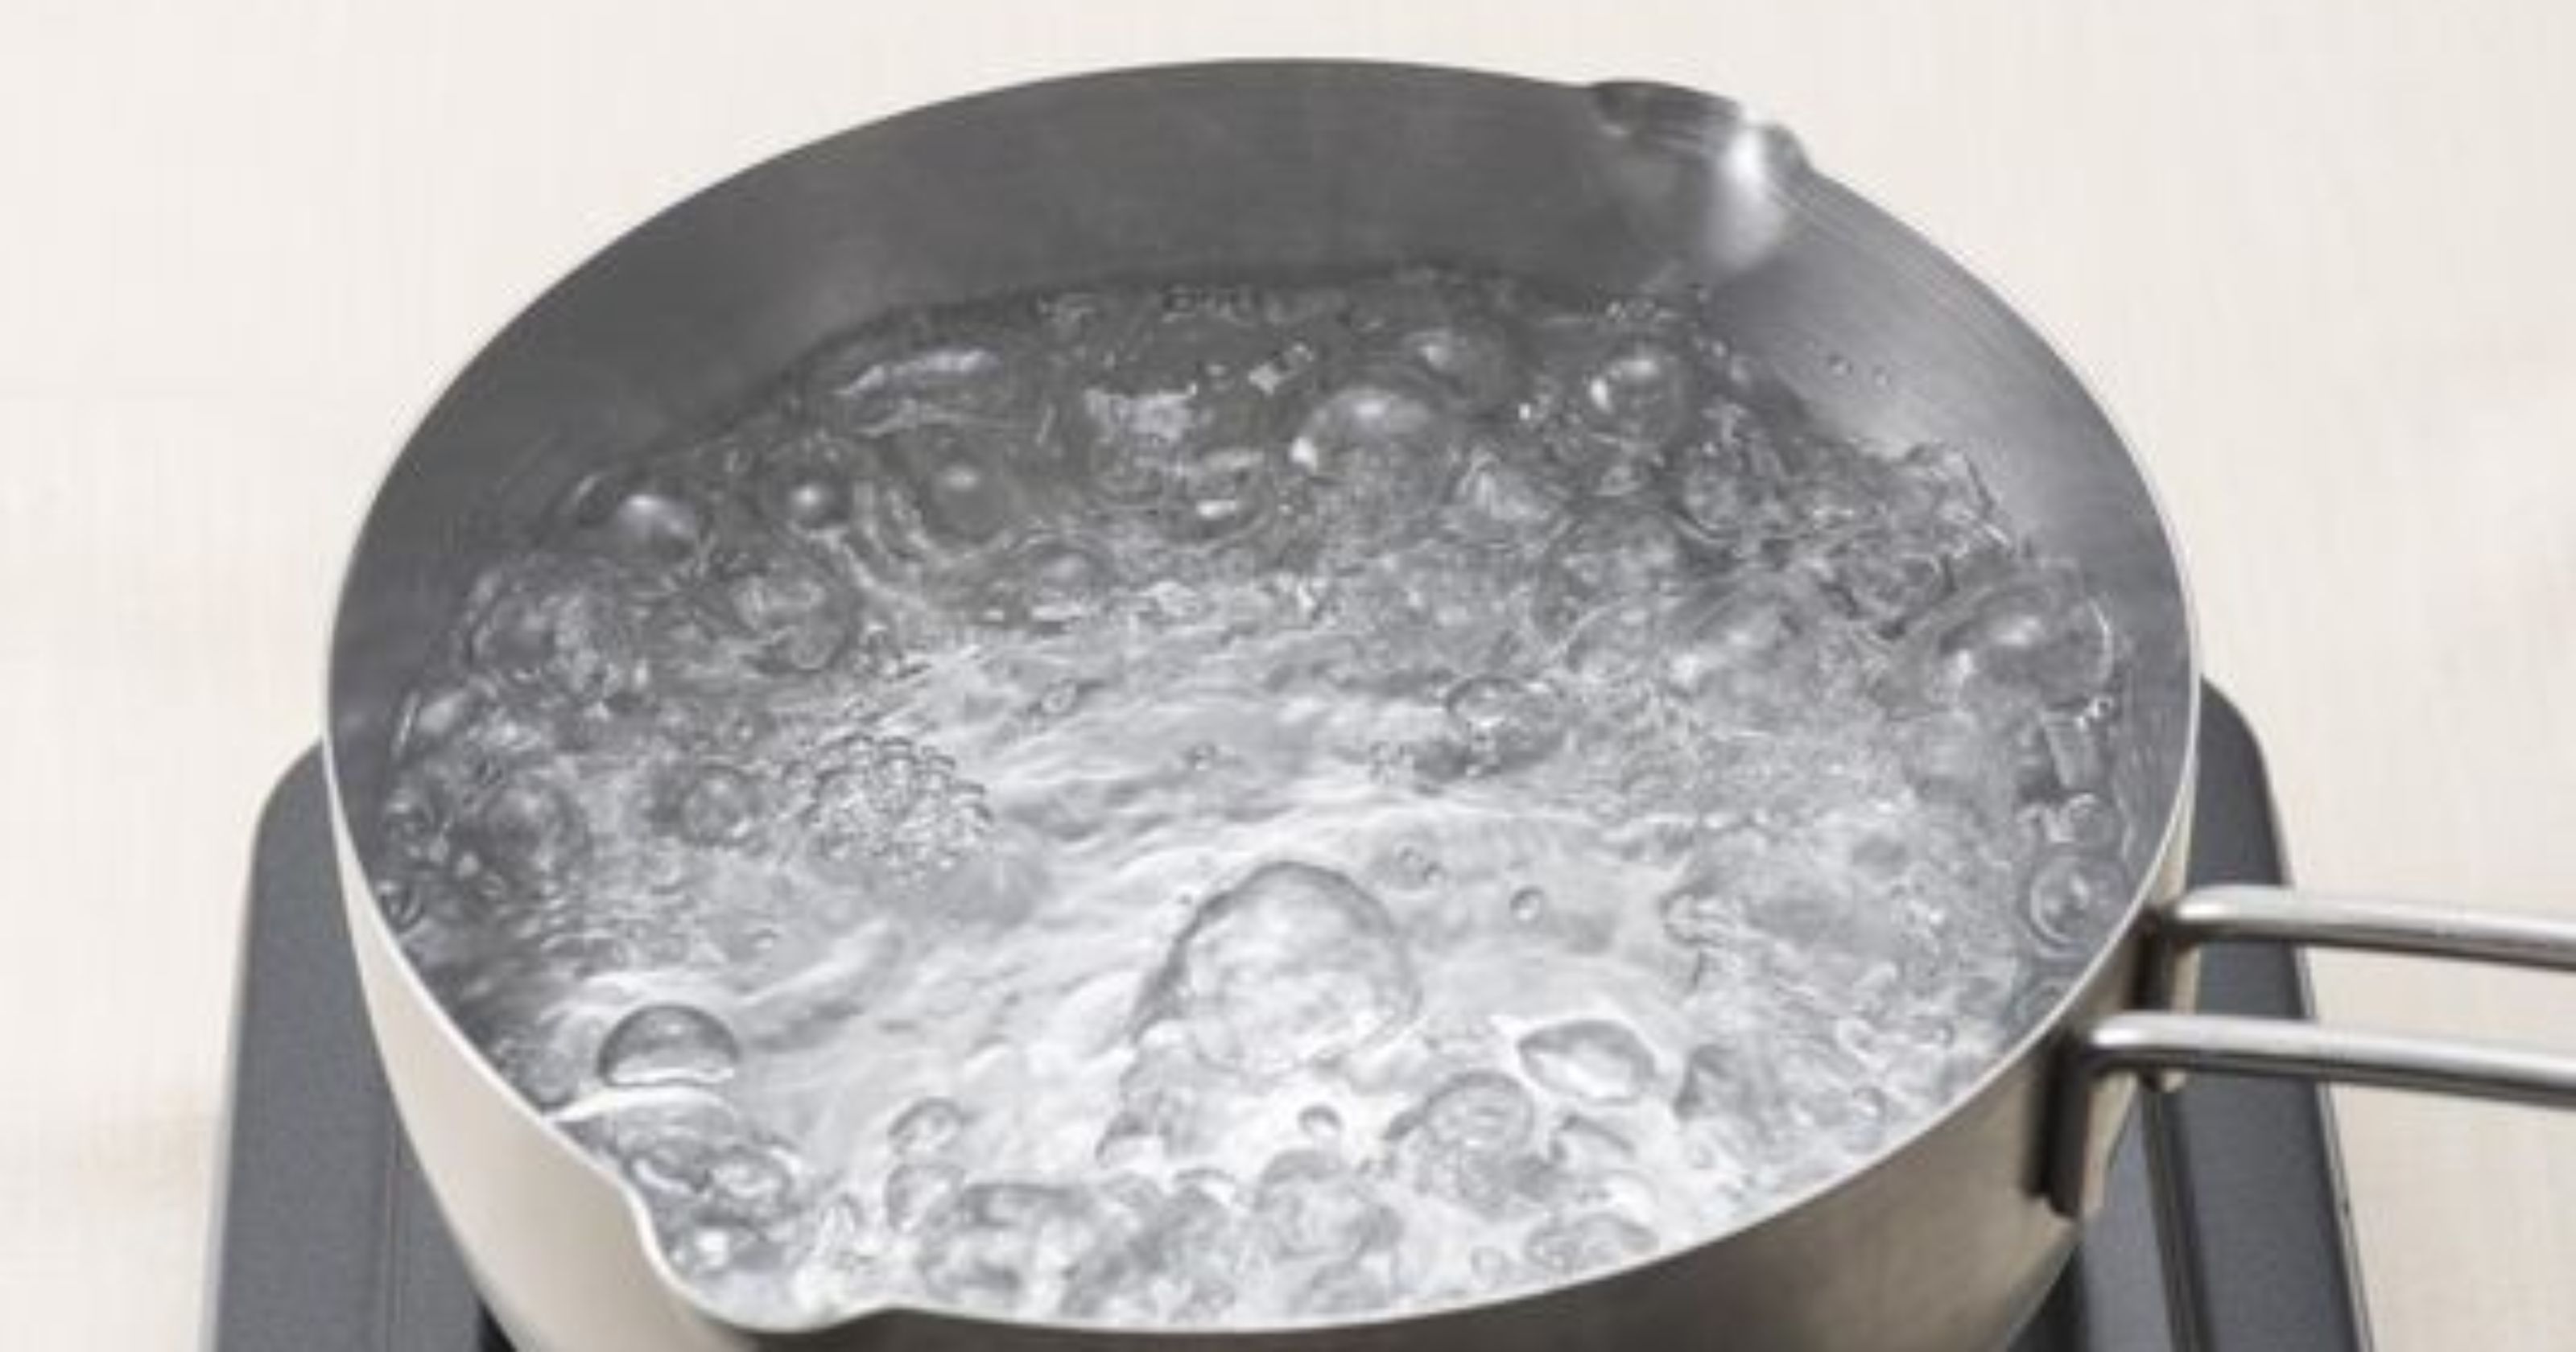 Boil water alert issued for part of West Bloomfield